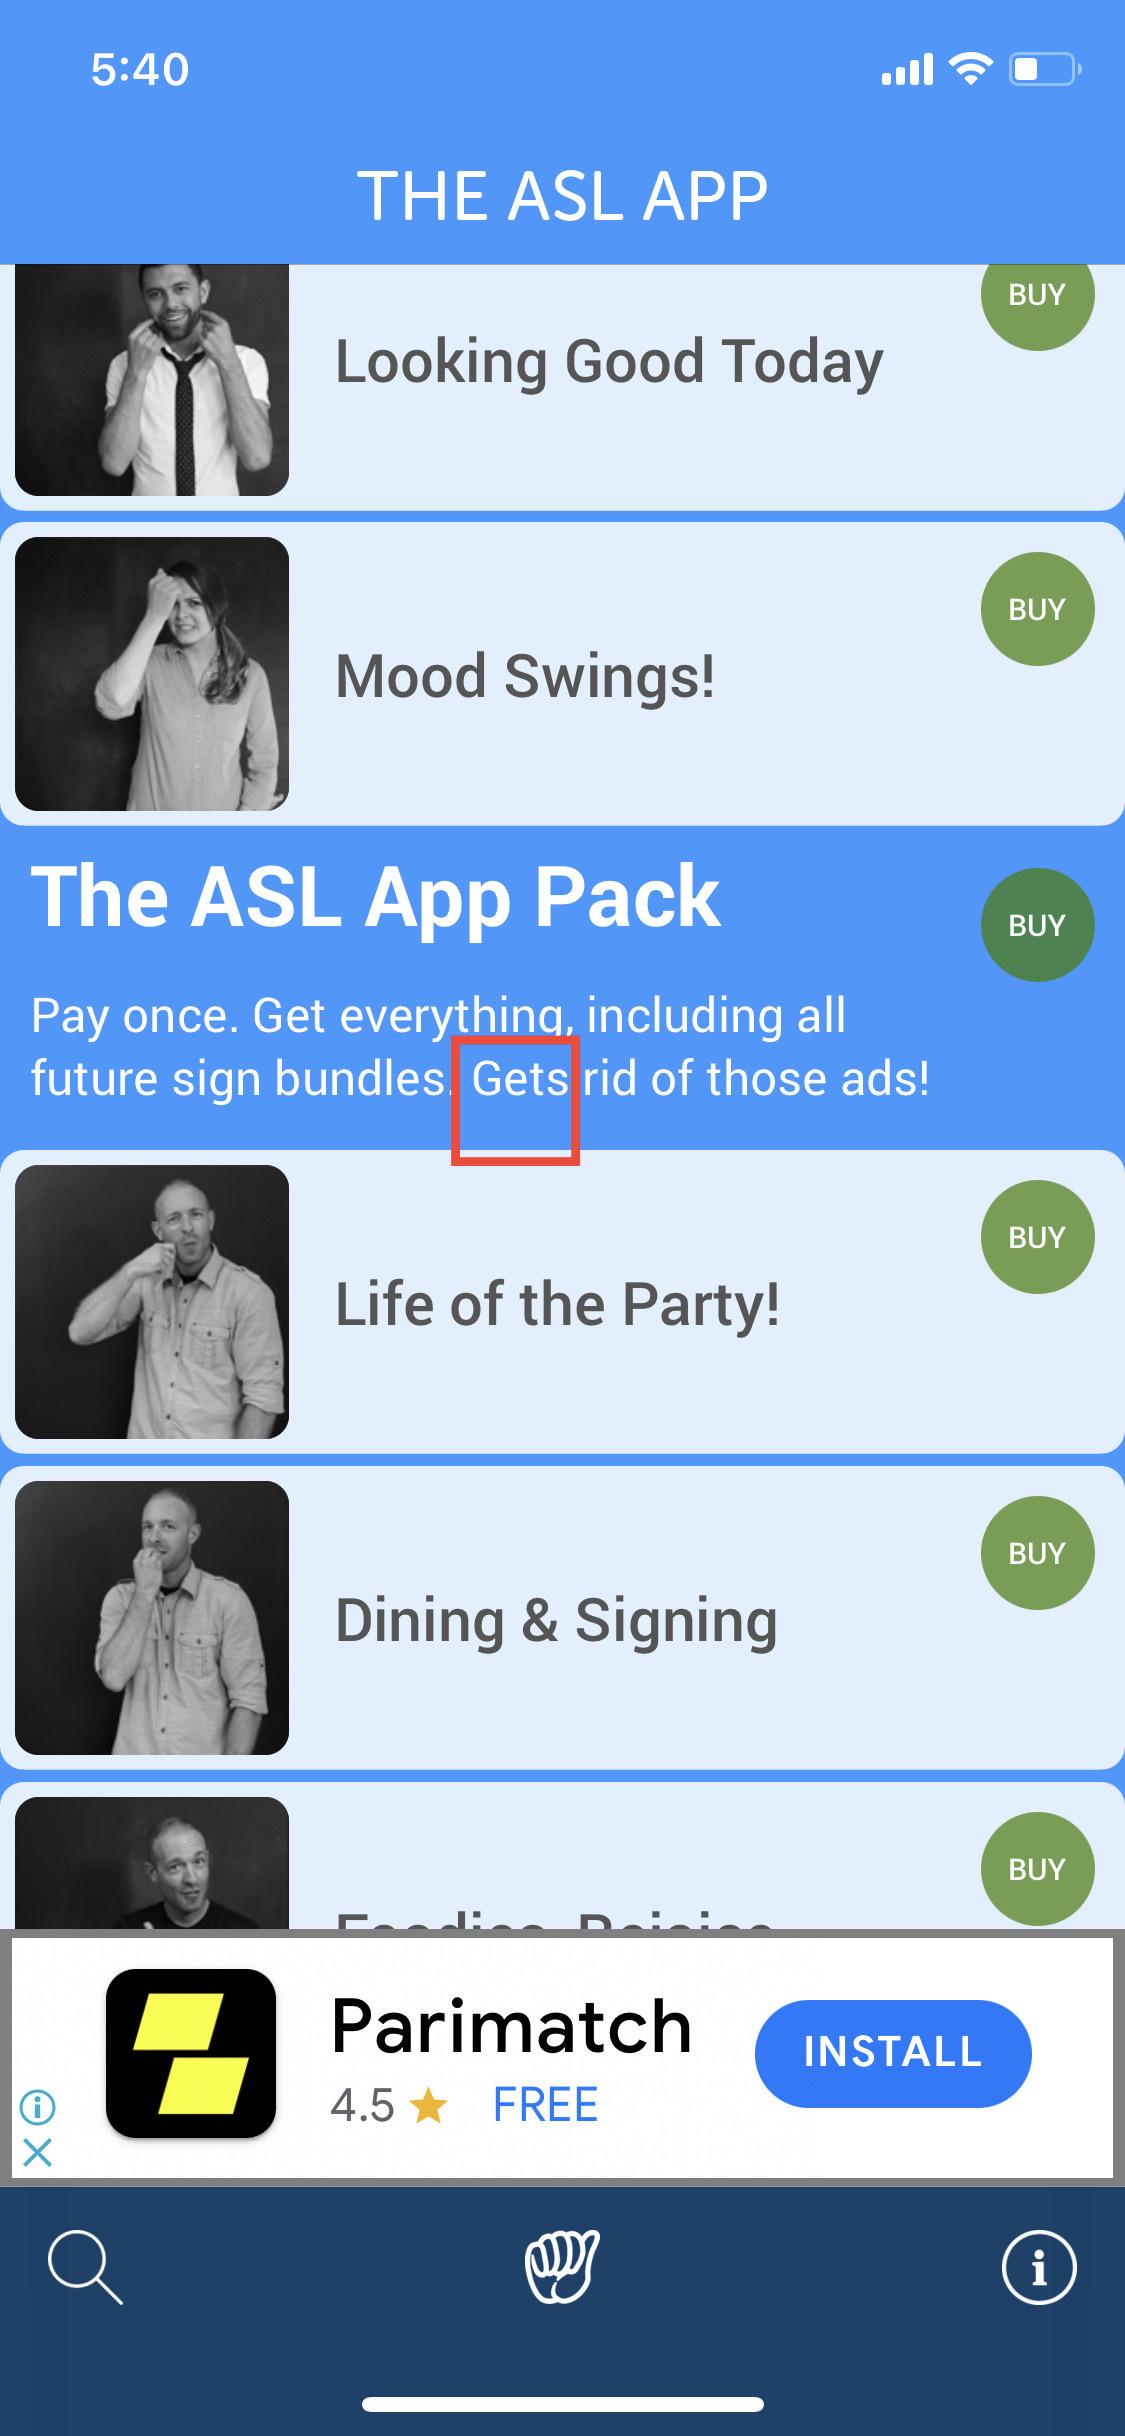 A mistake is present in the summary text for buying The ASL App Pack